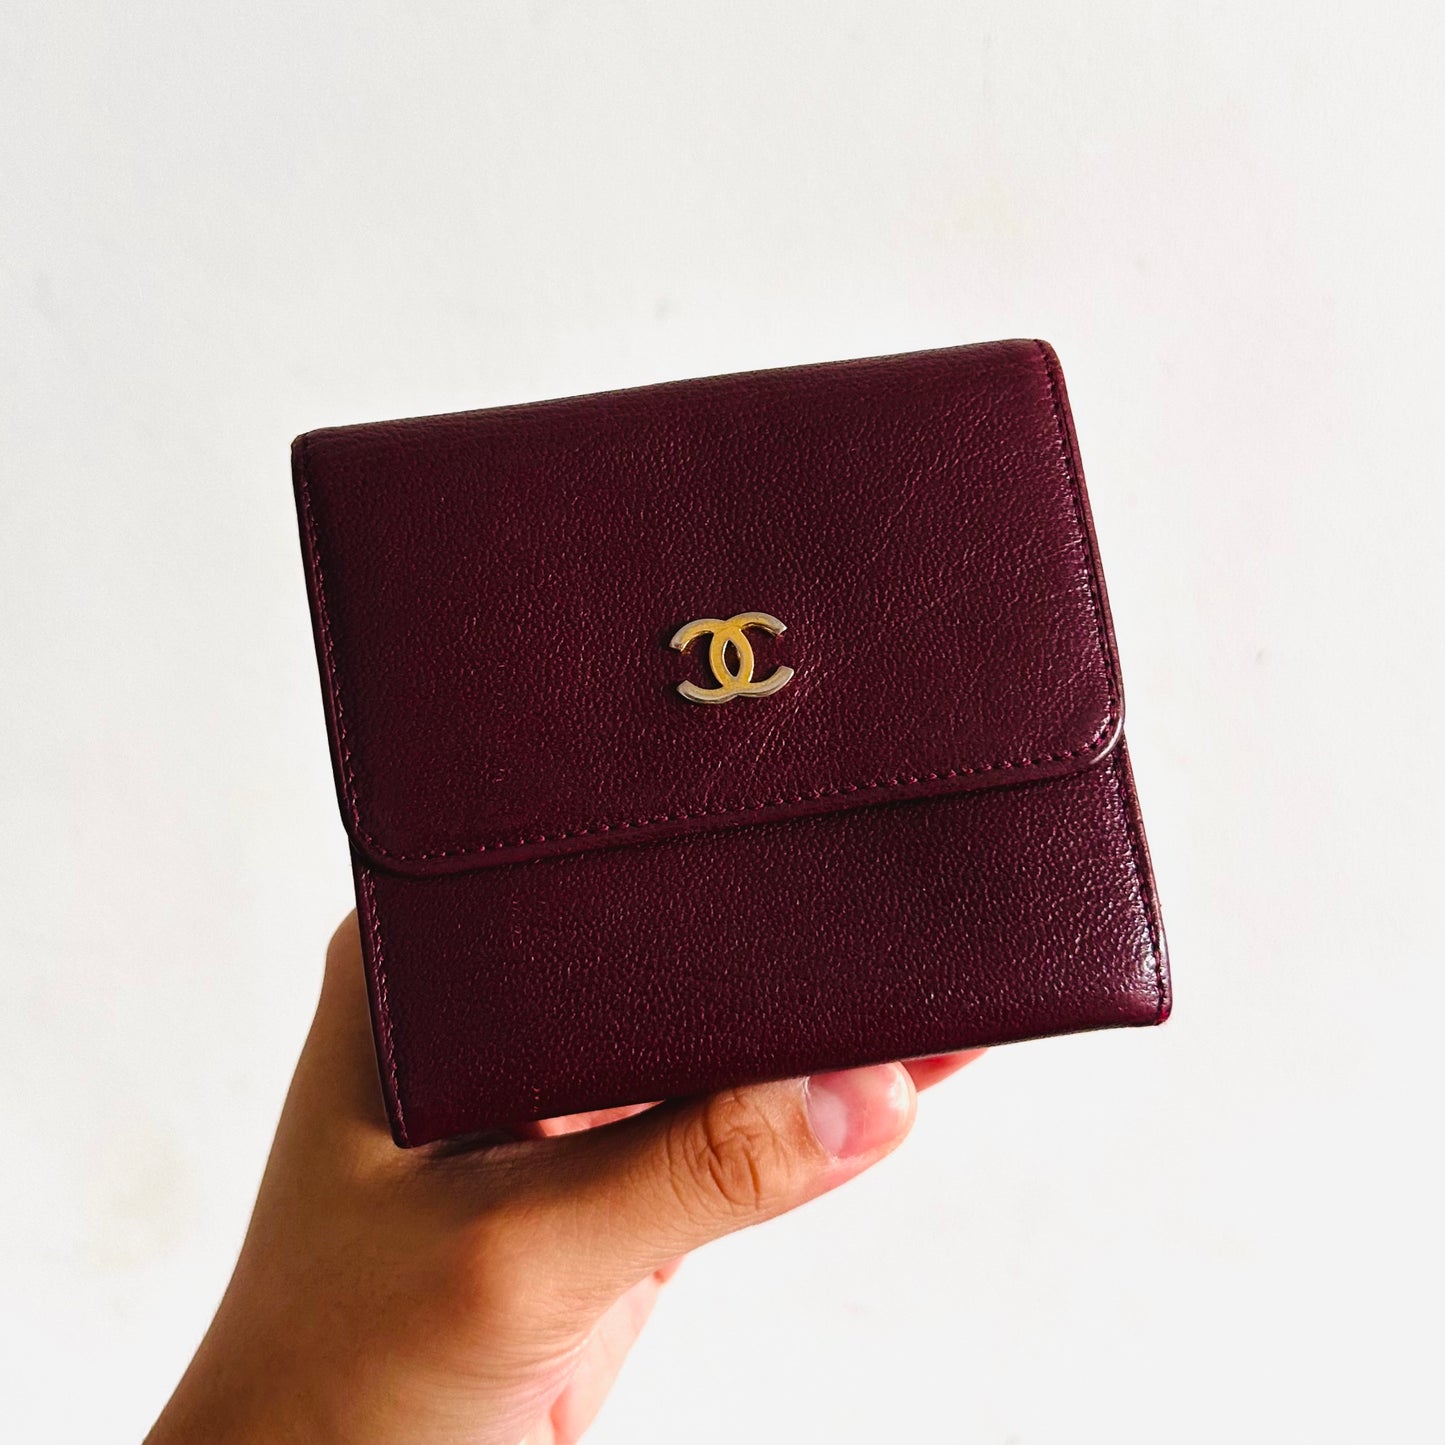 Chanel Maroon GHW CC Logo Chevre Leather Vintage Compact Trifold Flap Wallet 7s